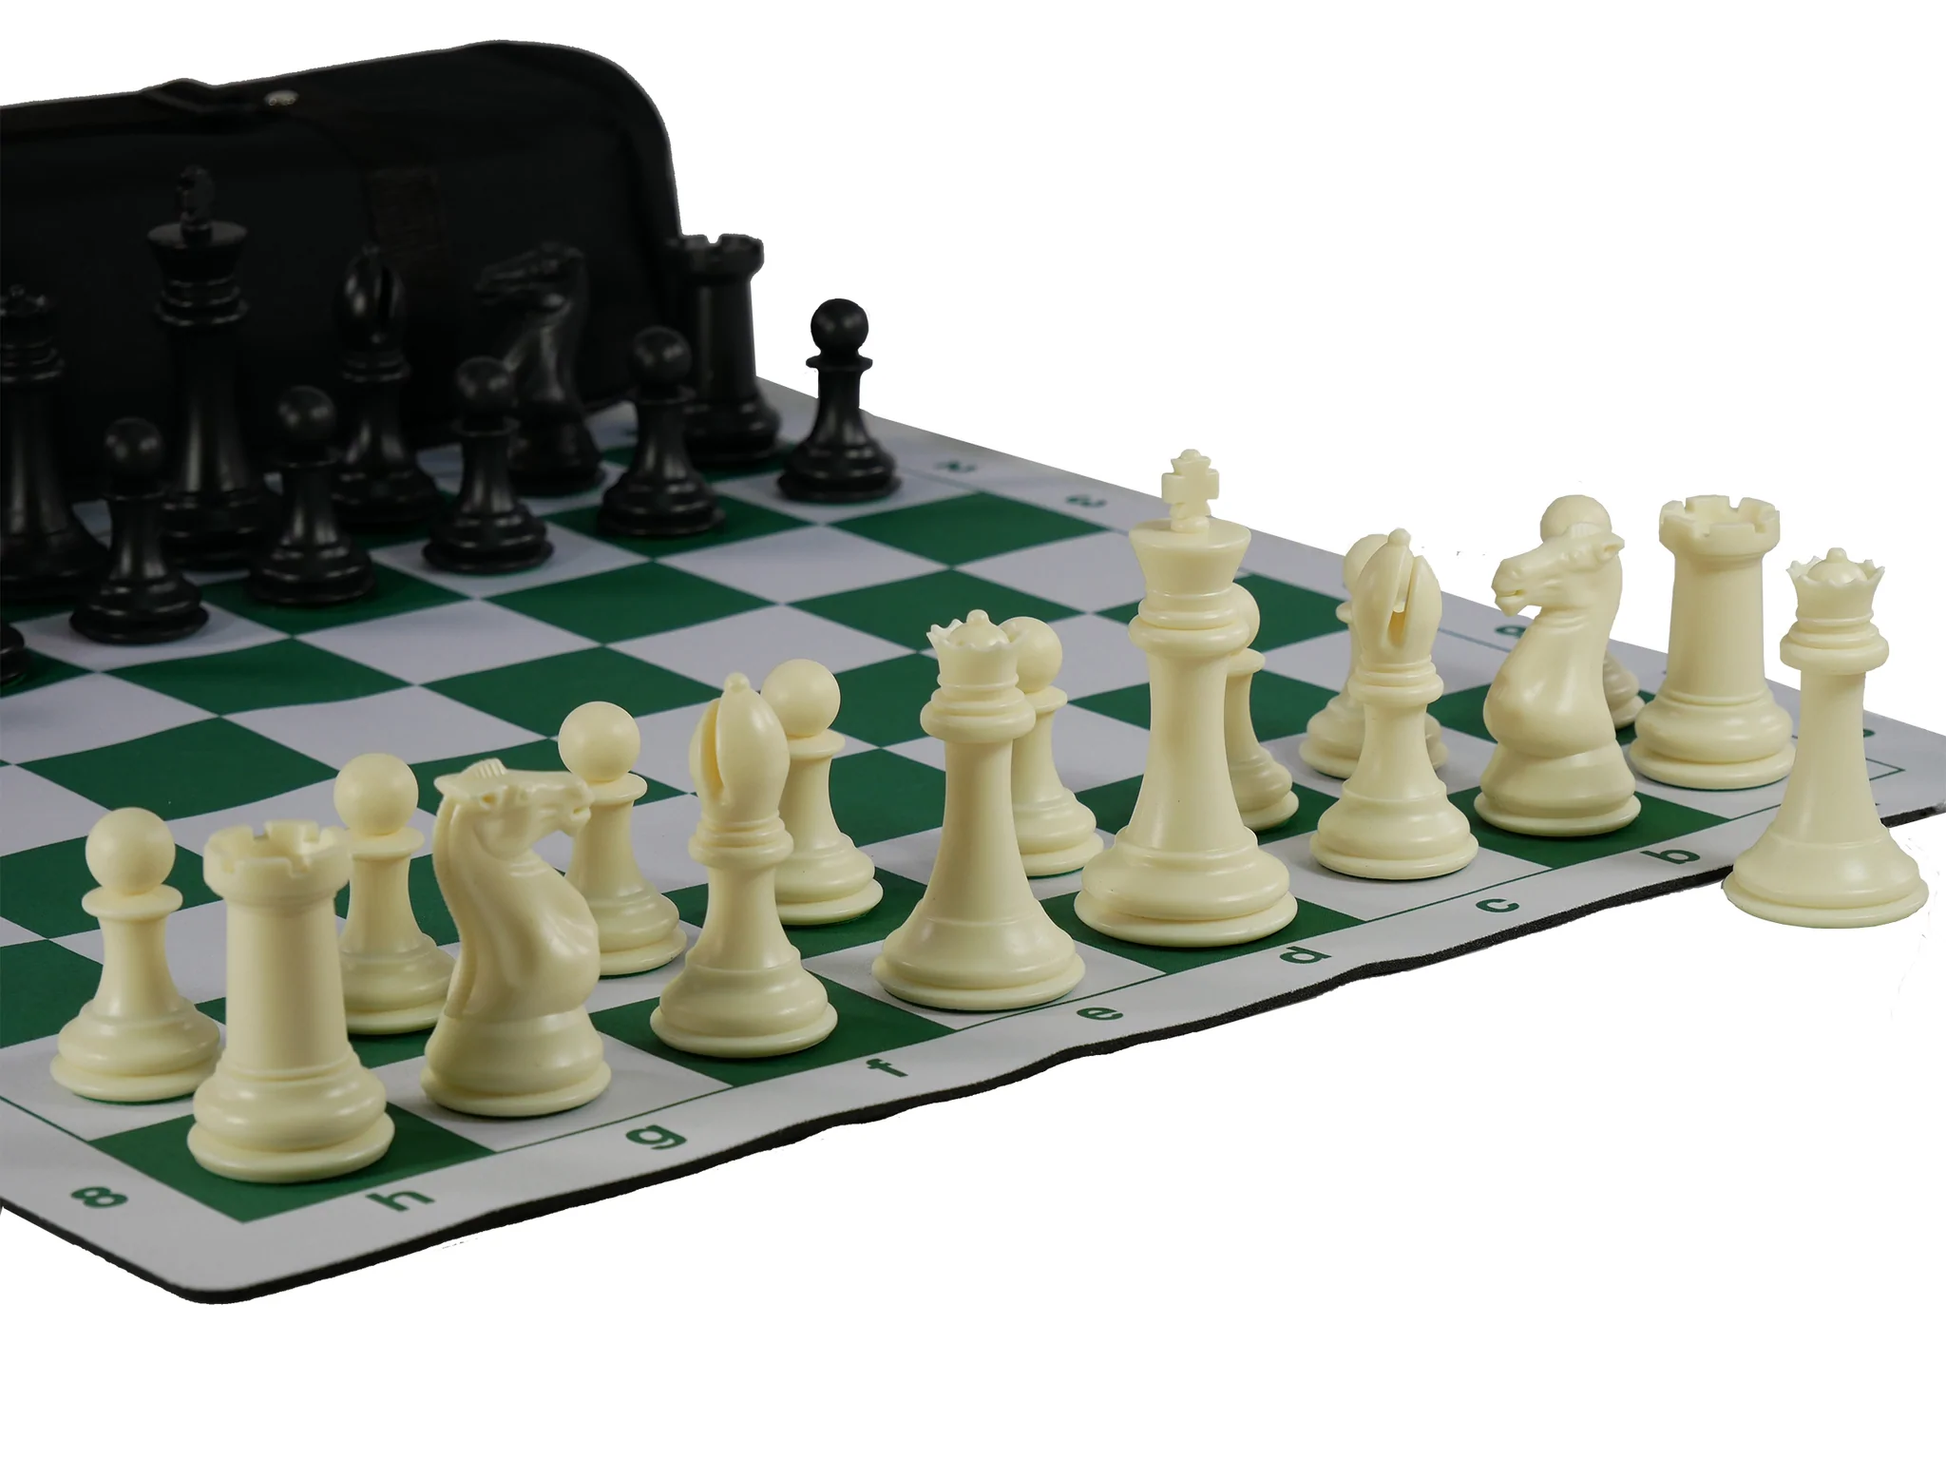 20 inch roll-up chess board with 4 inch plastic chessmen and tote bag